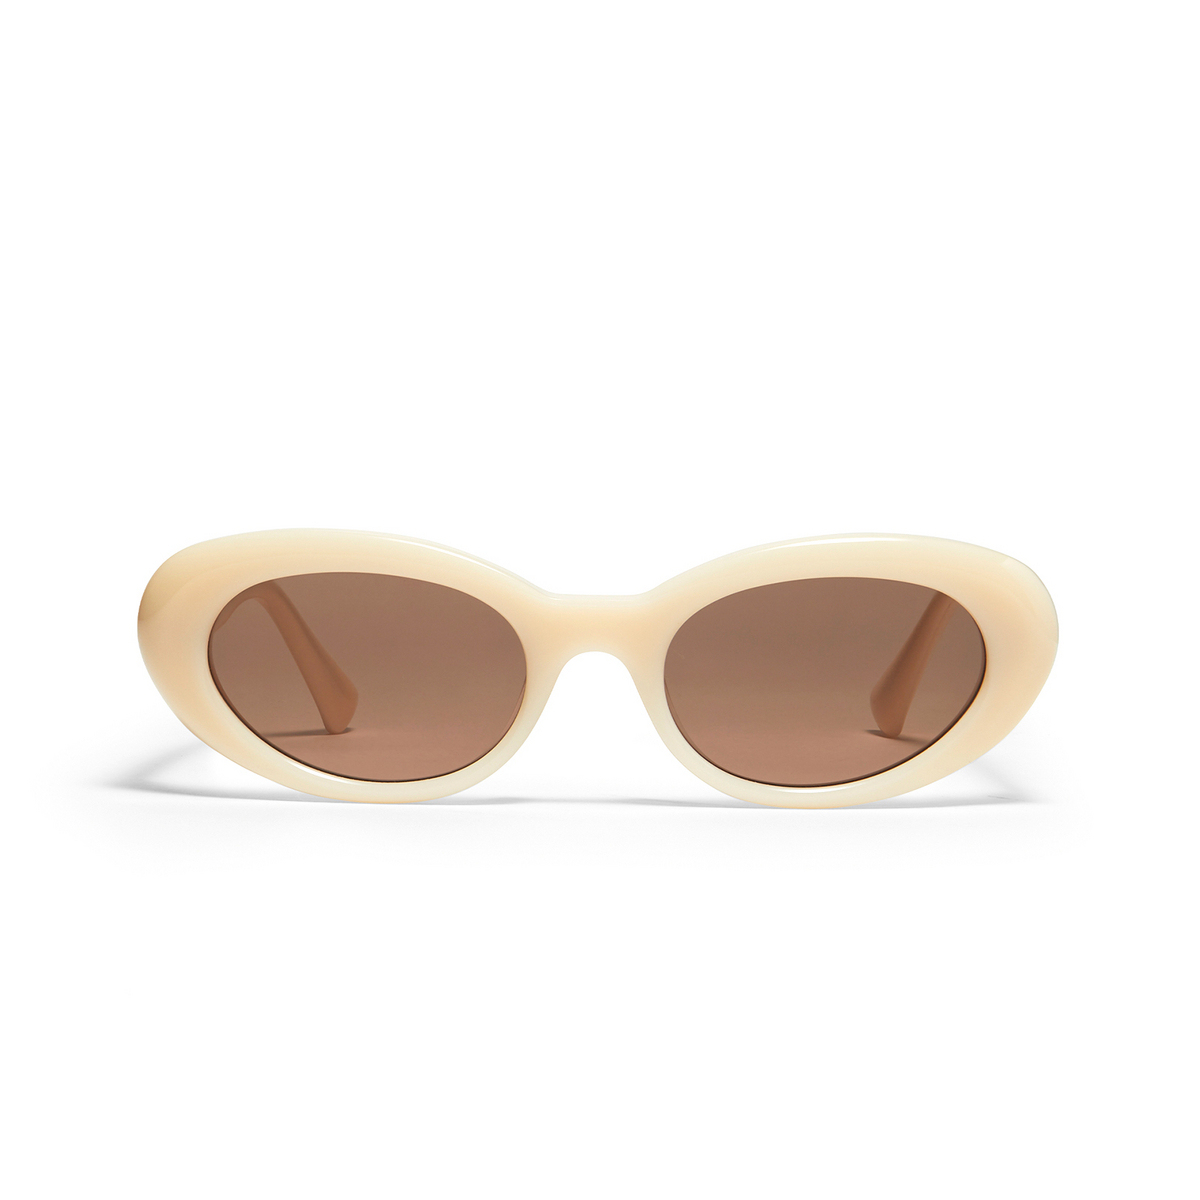 Gentle Monster® Cat-eye Sunglasses: Le color IV1 Ivory - front view